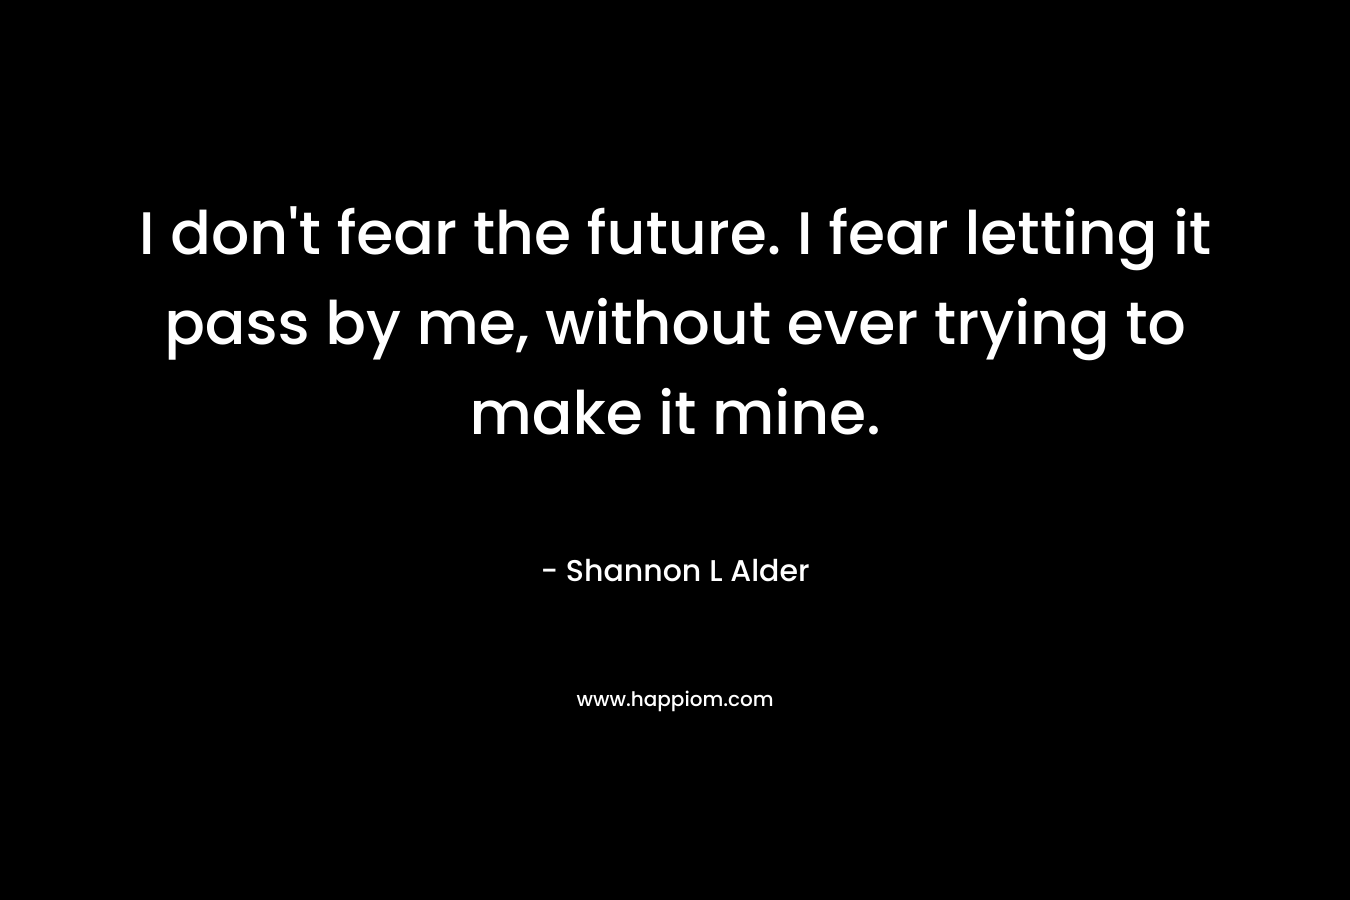 I don't fear the future. I fear letting it pass by me, without ever trying to make it mine.